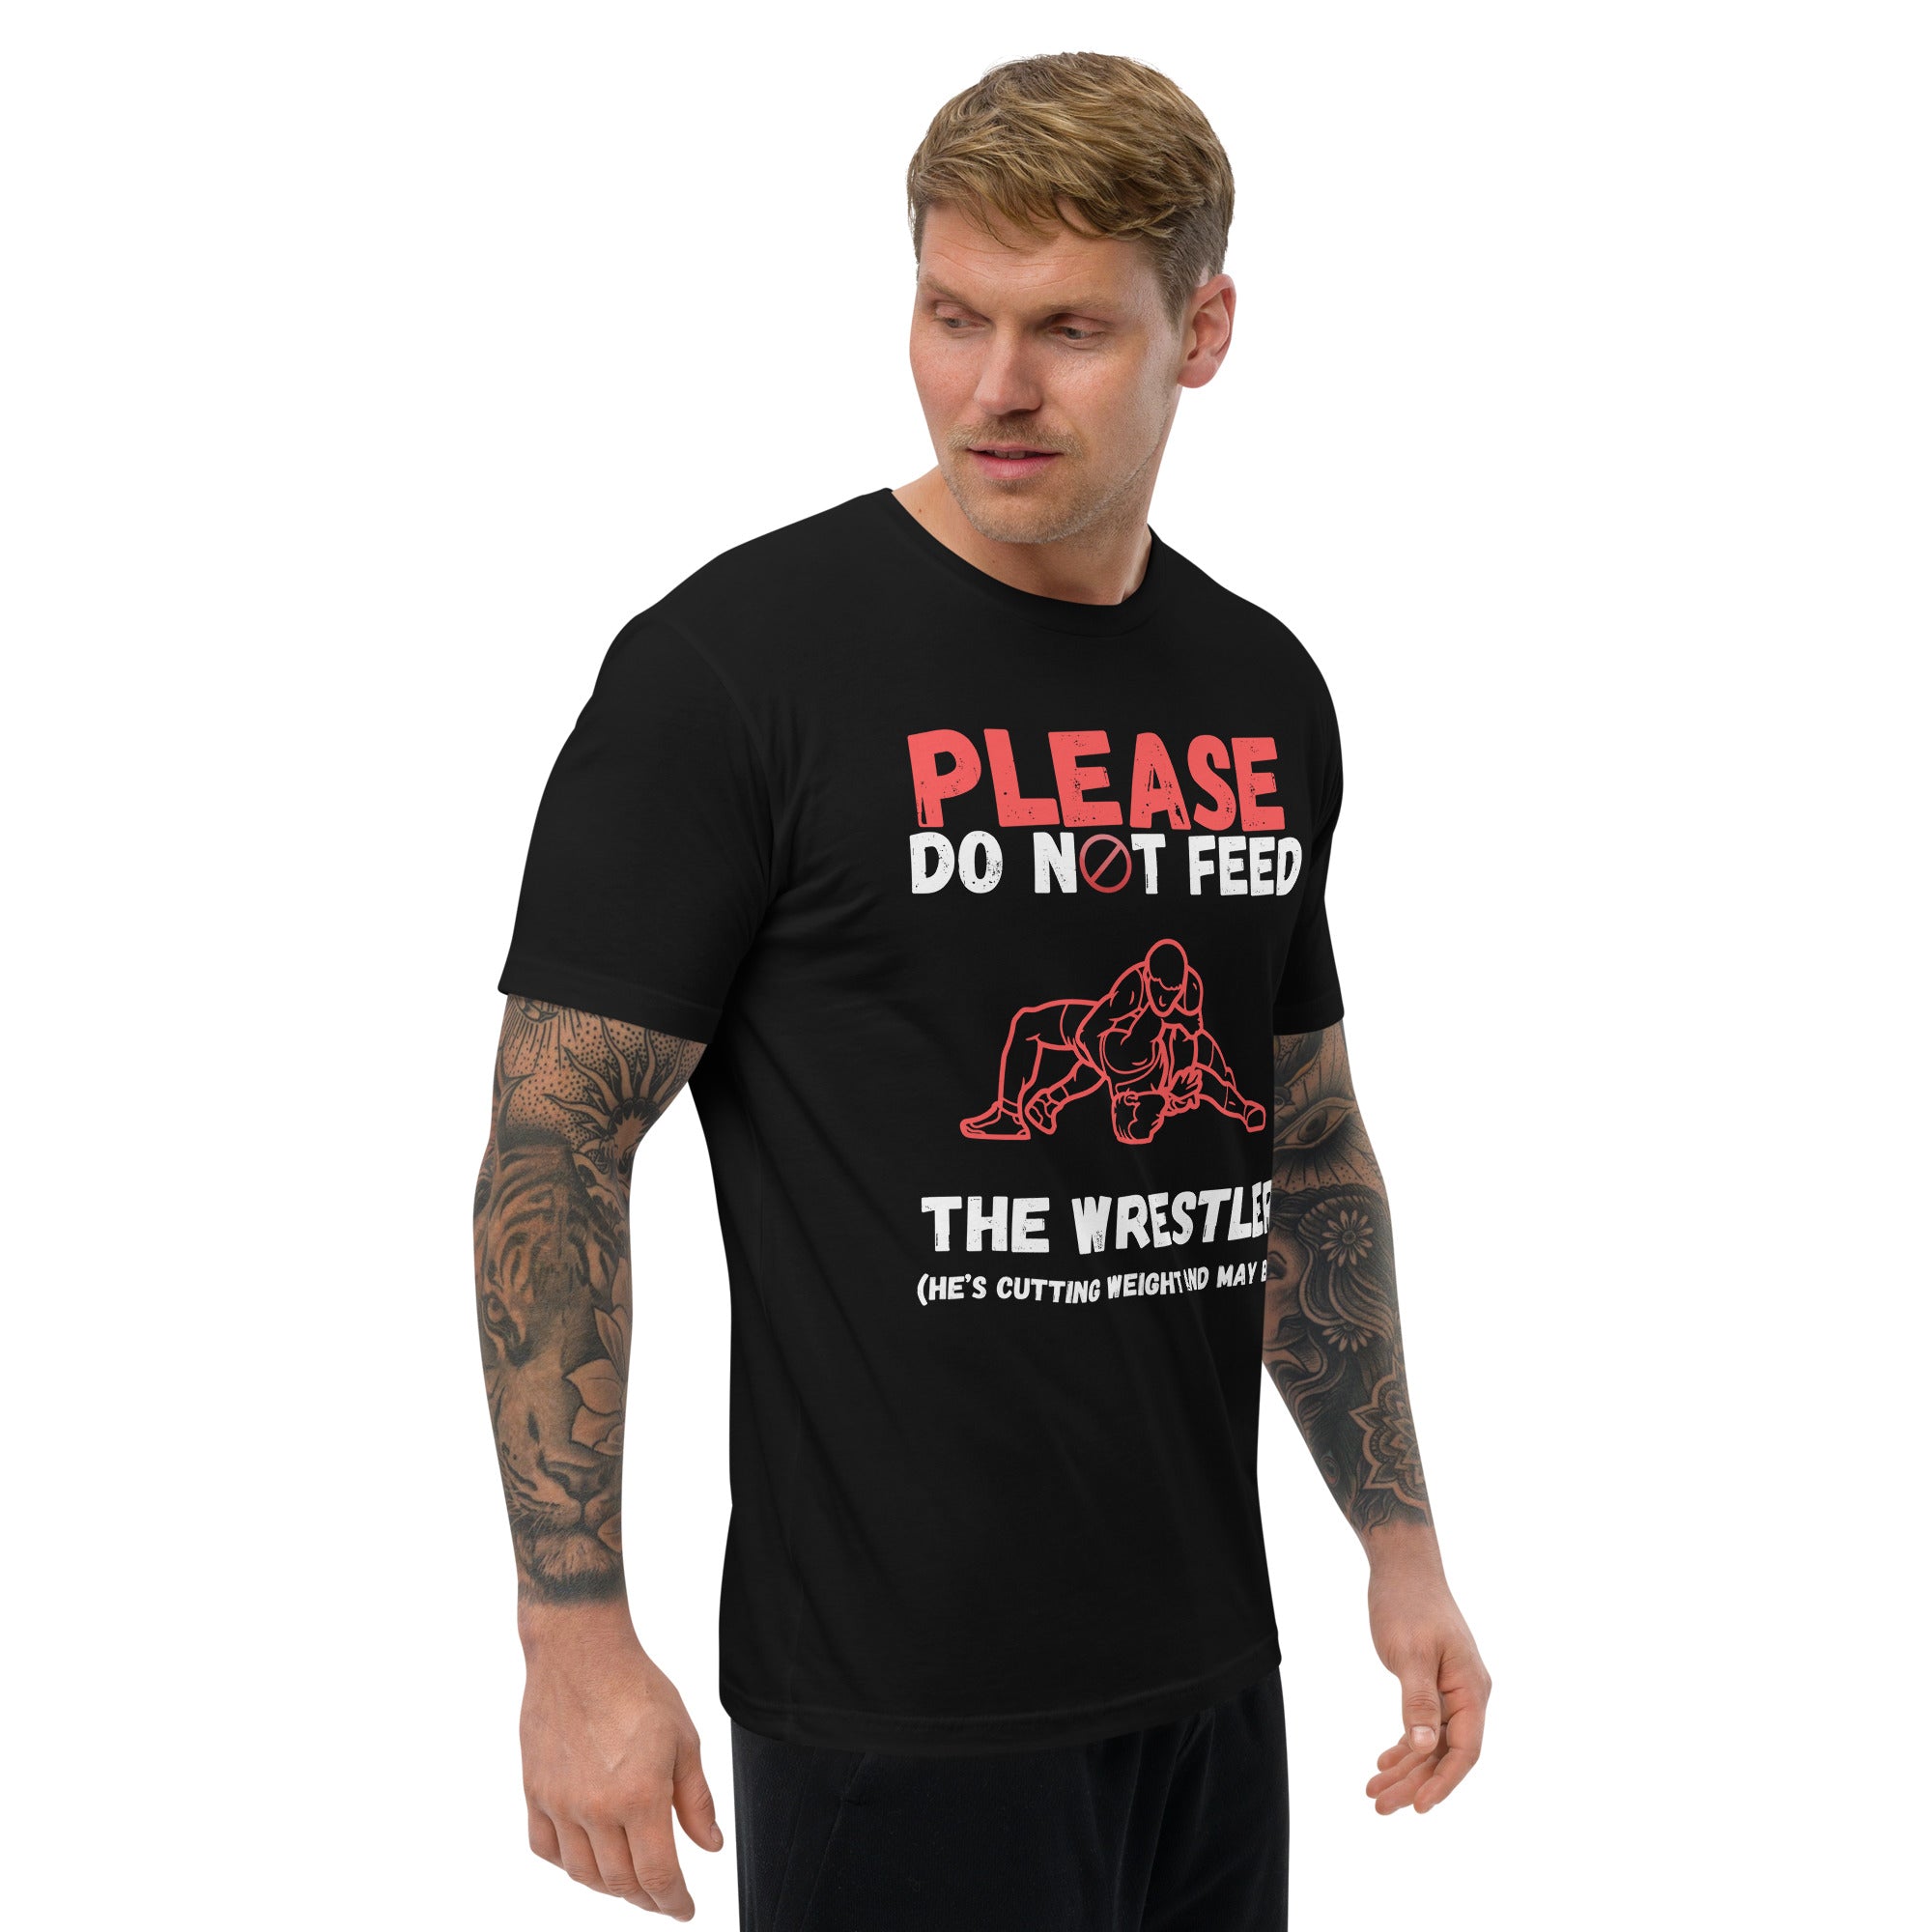 Do Not Feed The Wrestler Fitted T-Shirt